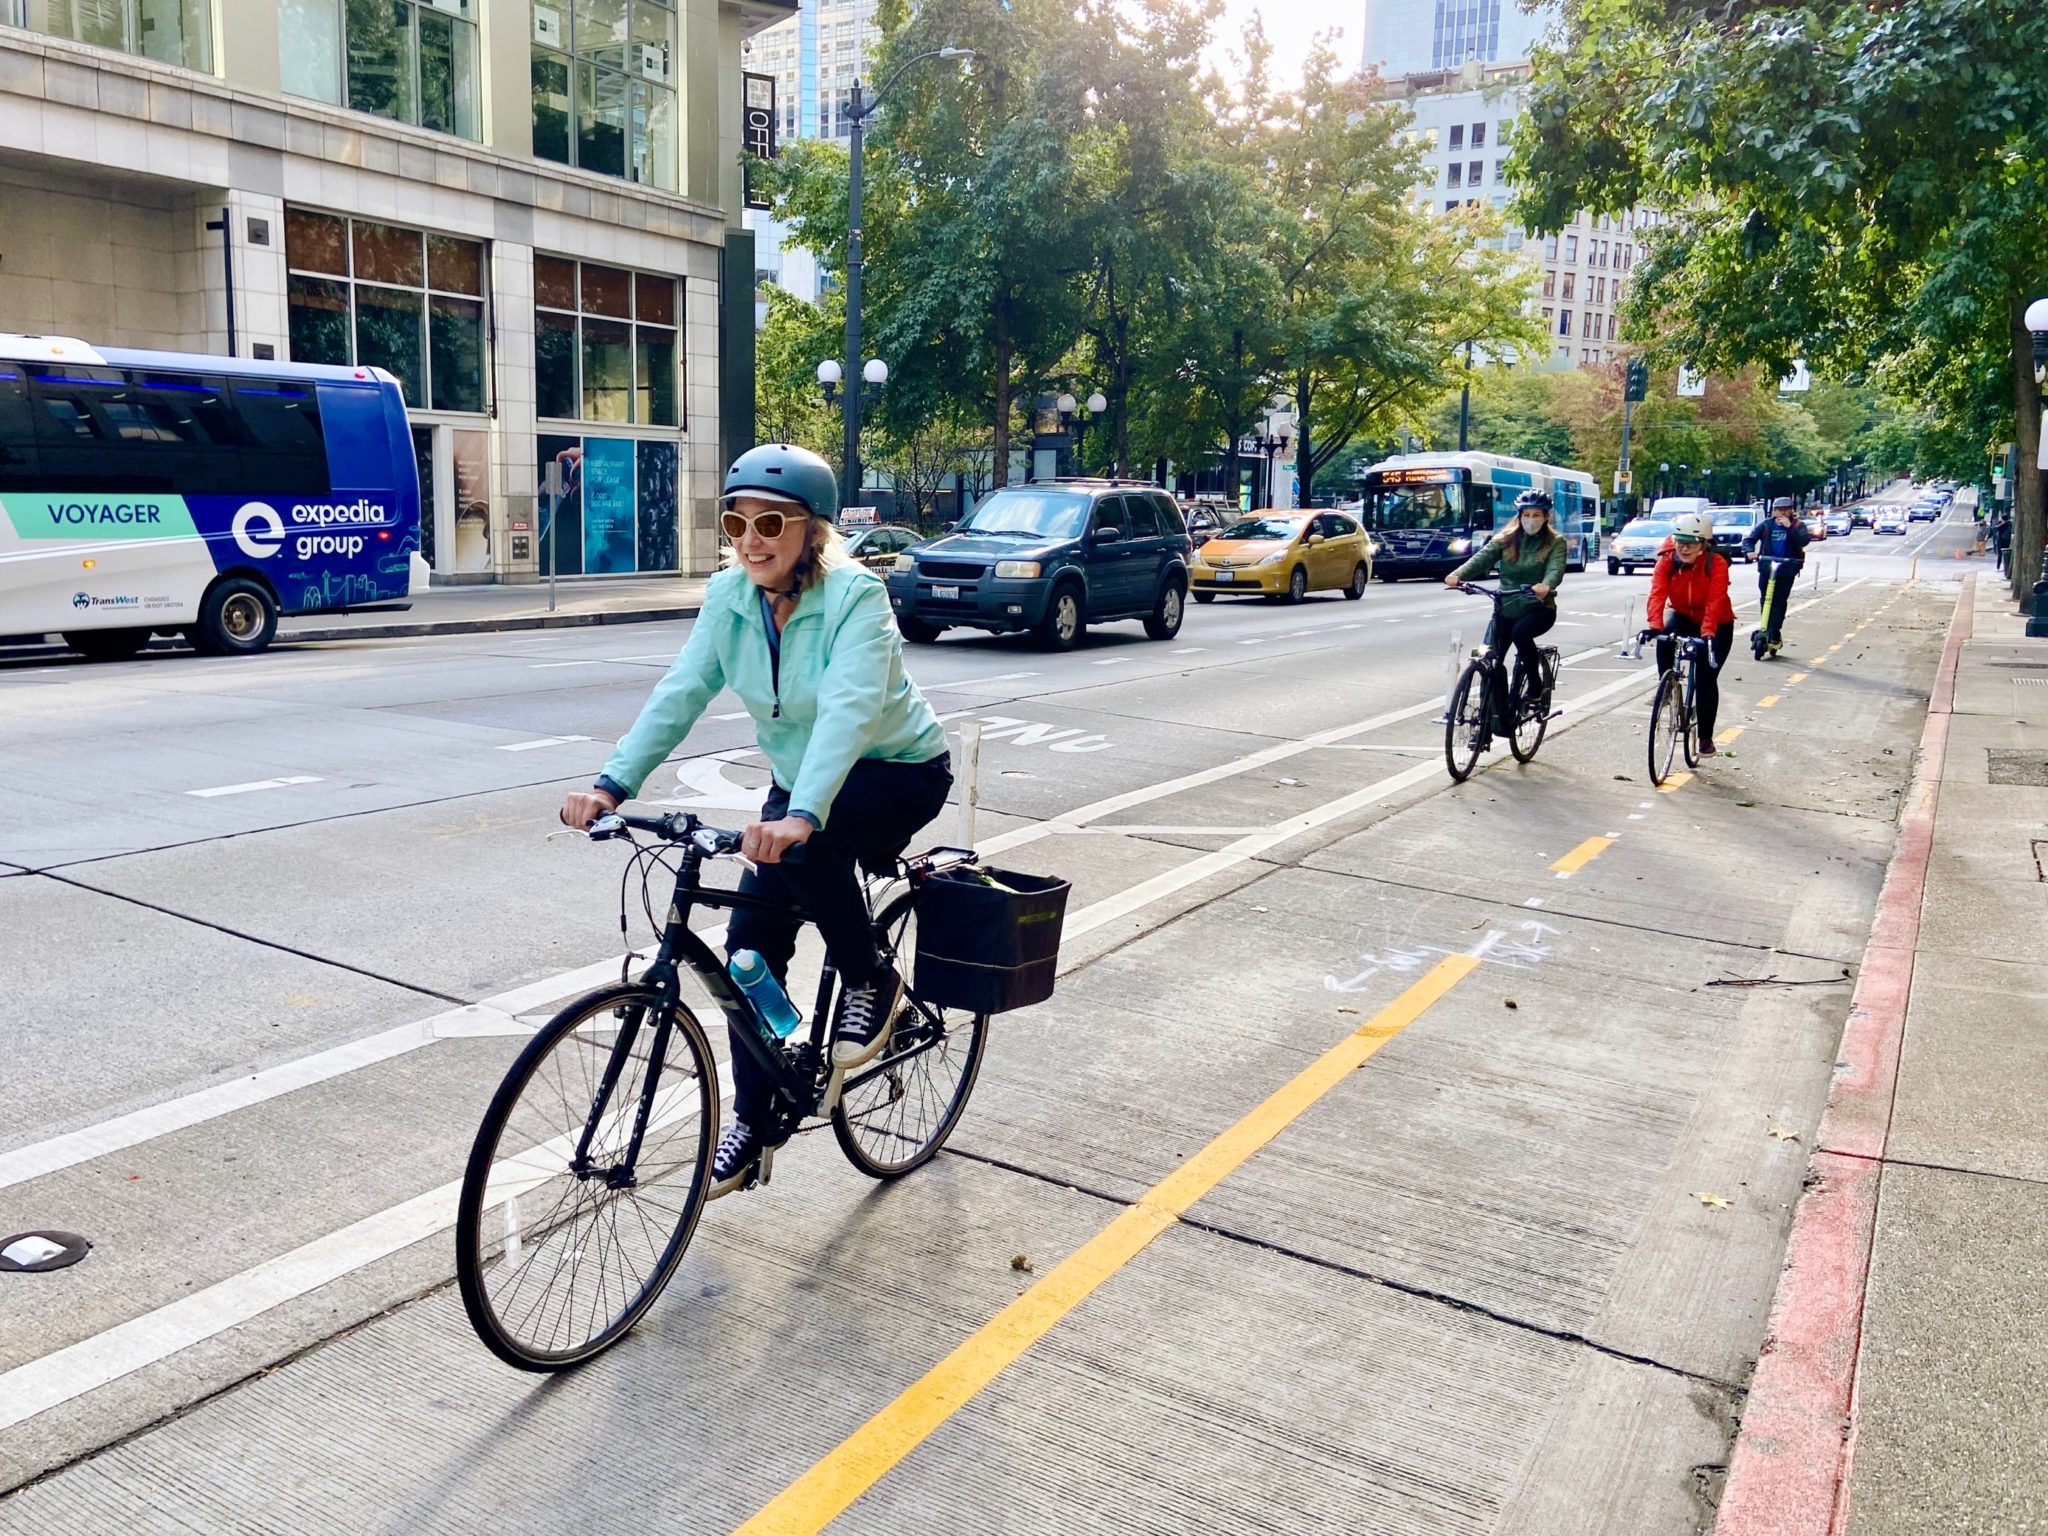 Members of the Seattle Department of Transportation ride along the new 4th Ave protected bike lane on Thursday, October 7. Several people can be seen biking in the foreground and right side of the image, with cars and buses traveling along 4th Ave in the background. Trees are also visible in the background.